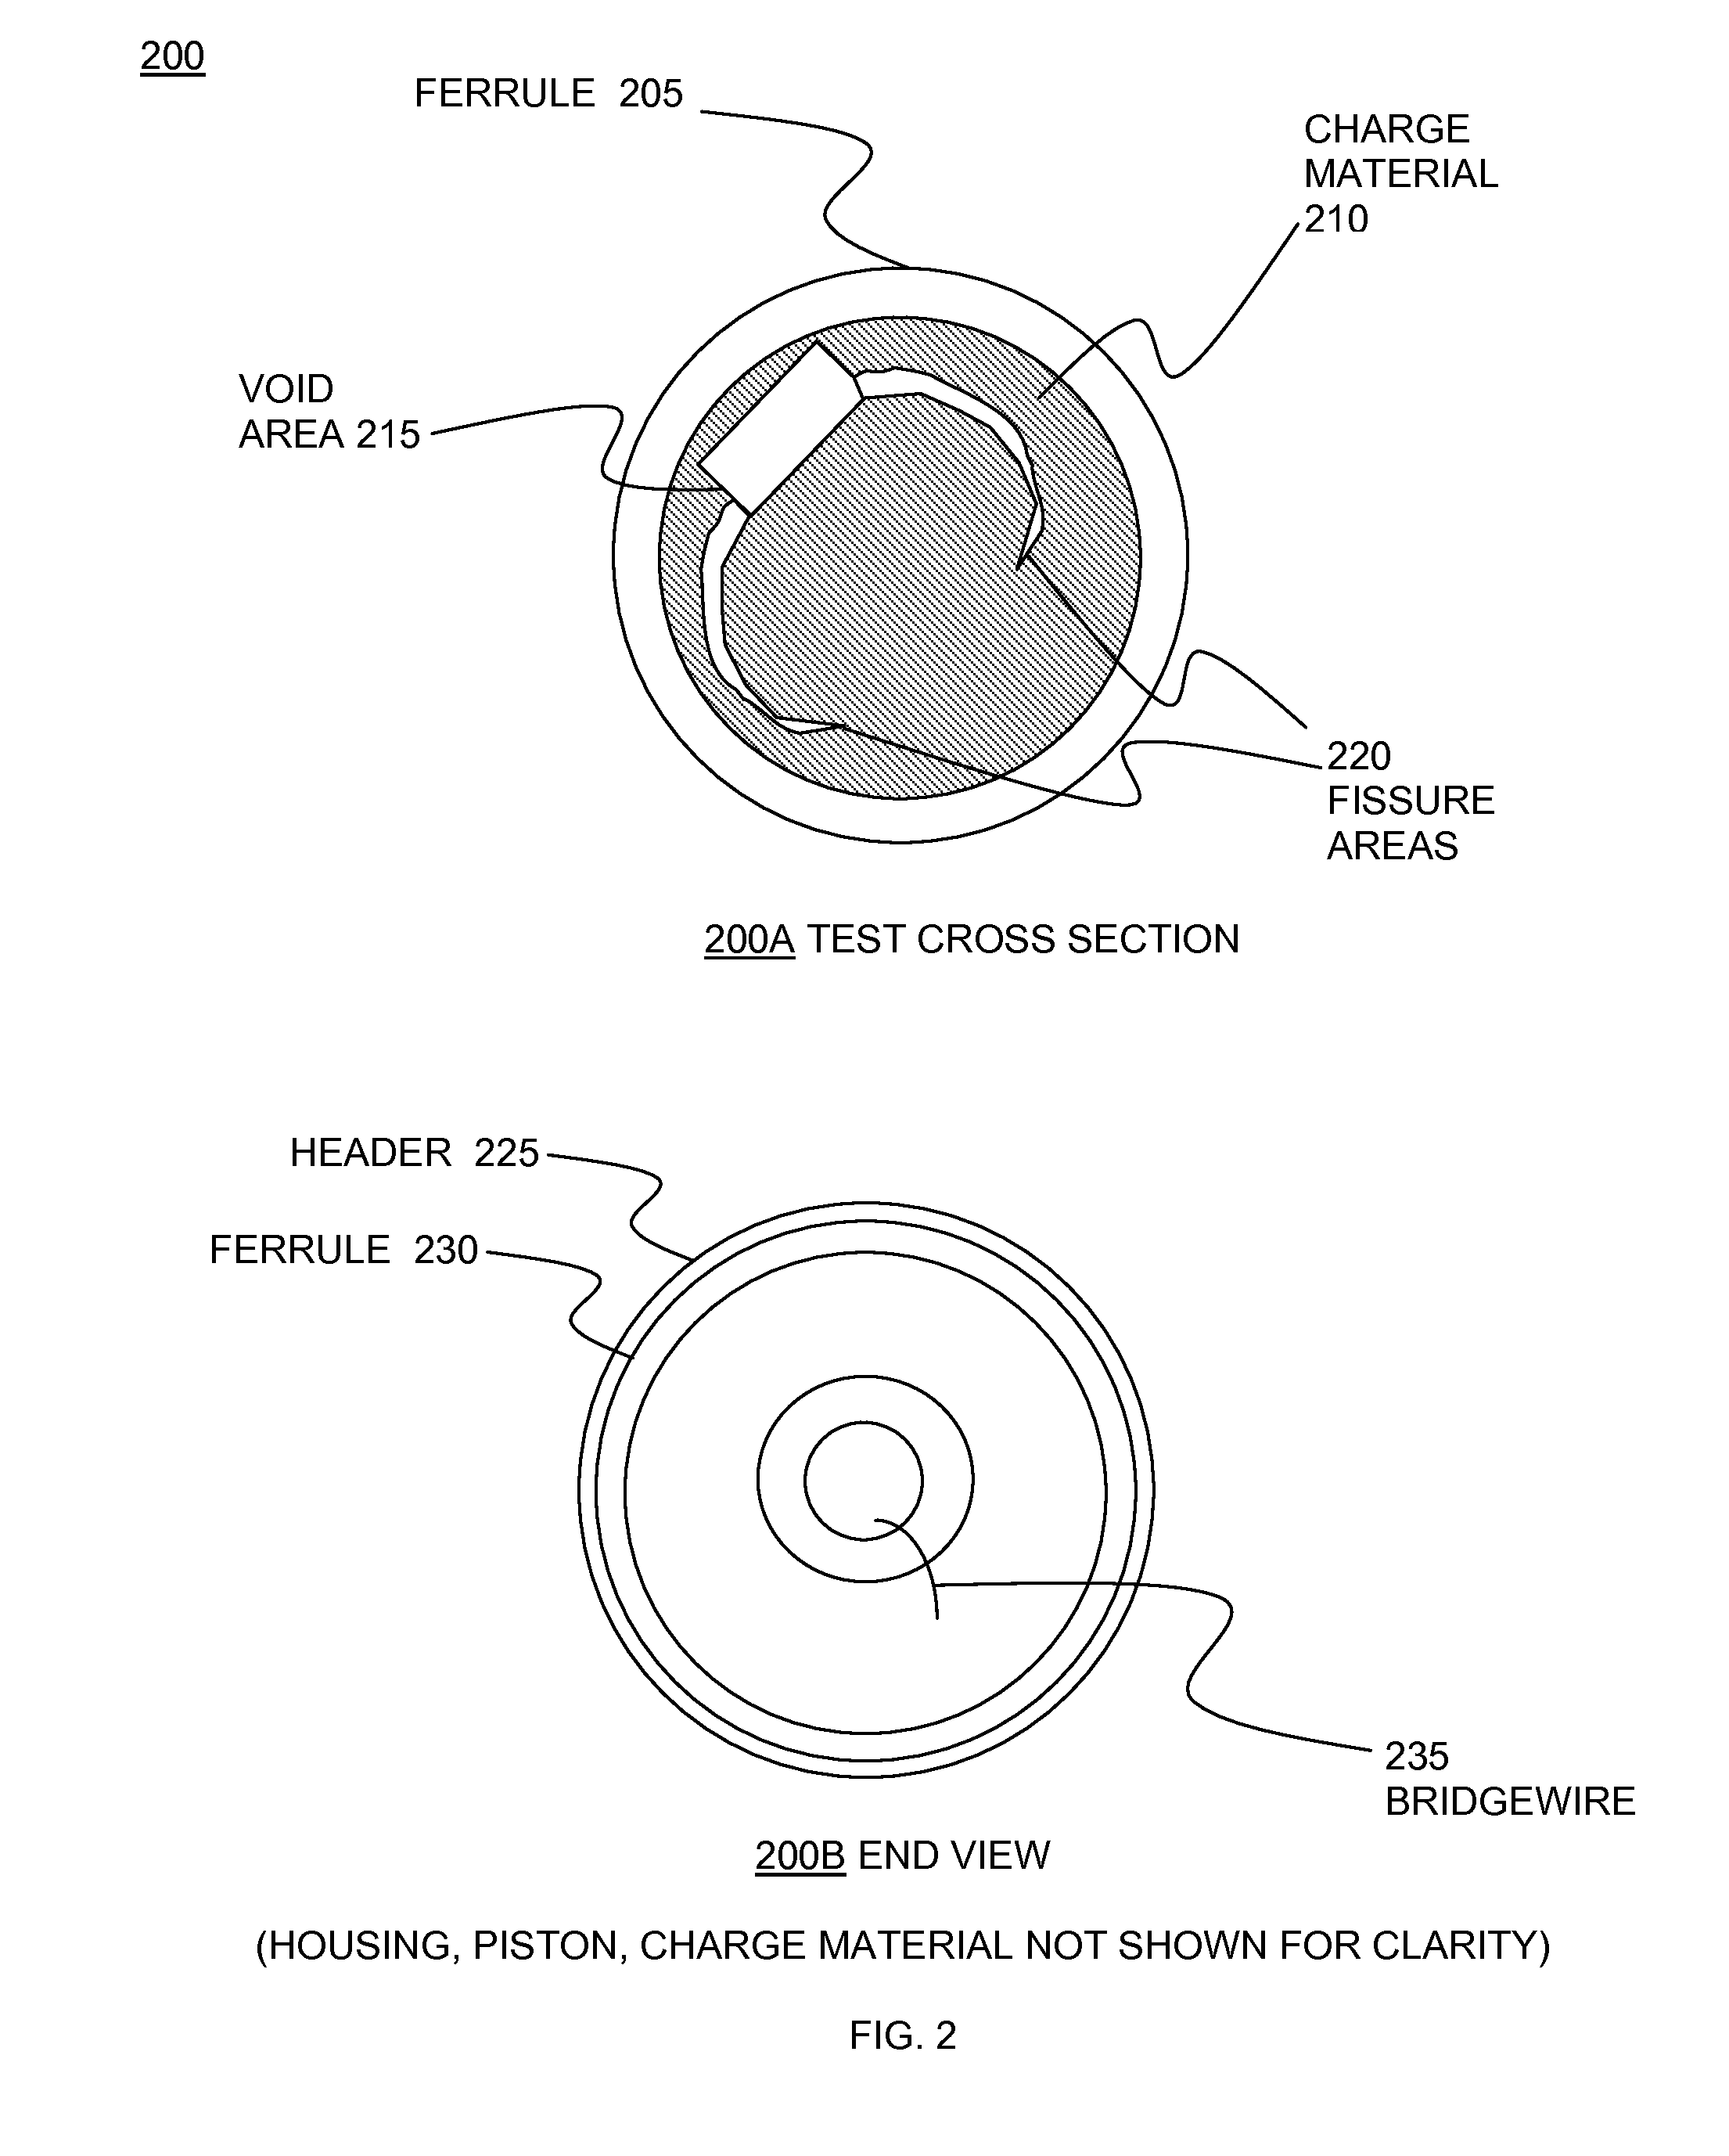 Enhanced reliability miniature piston actuator for an electronic thermal battery initiator